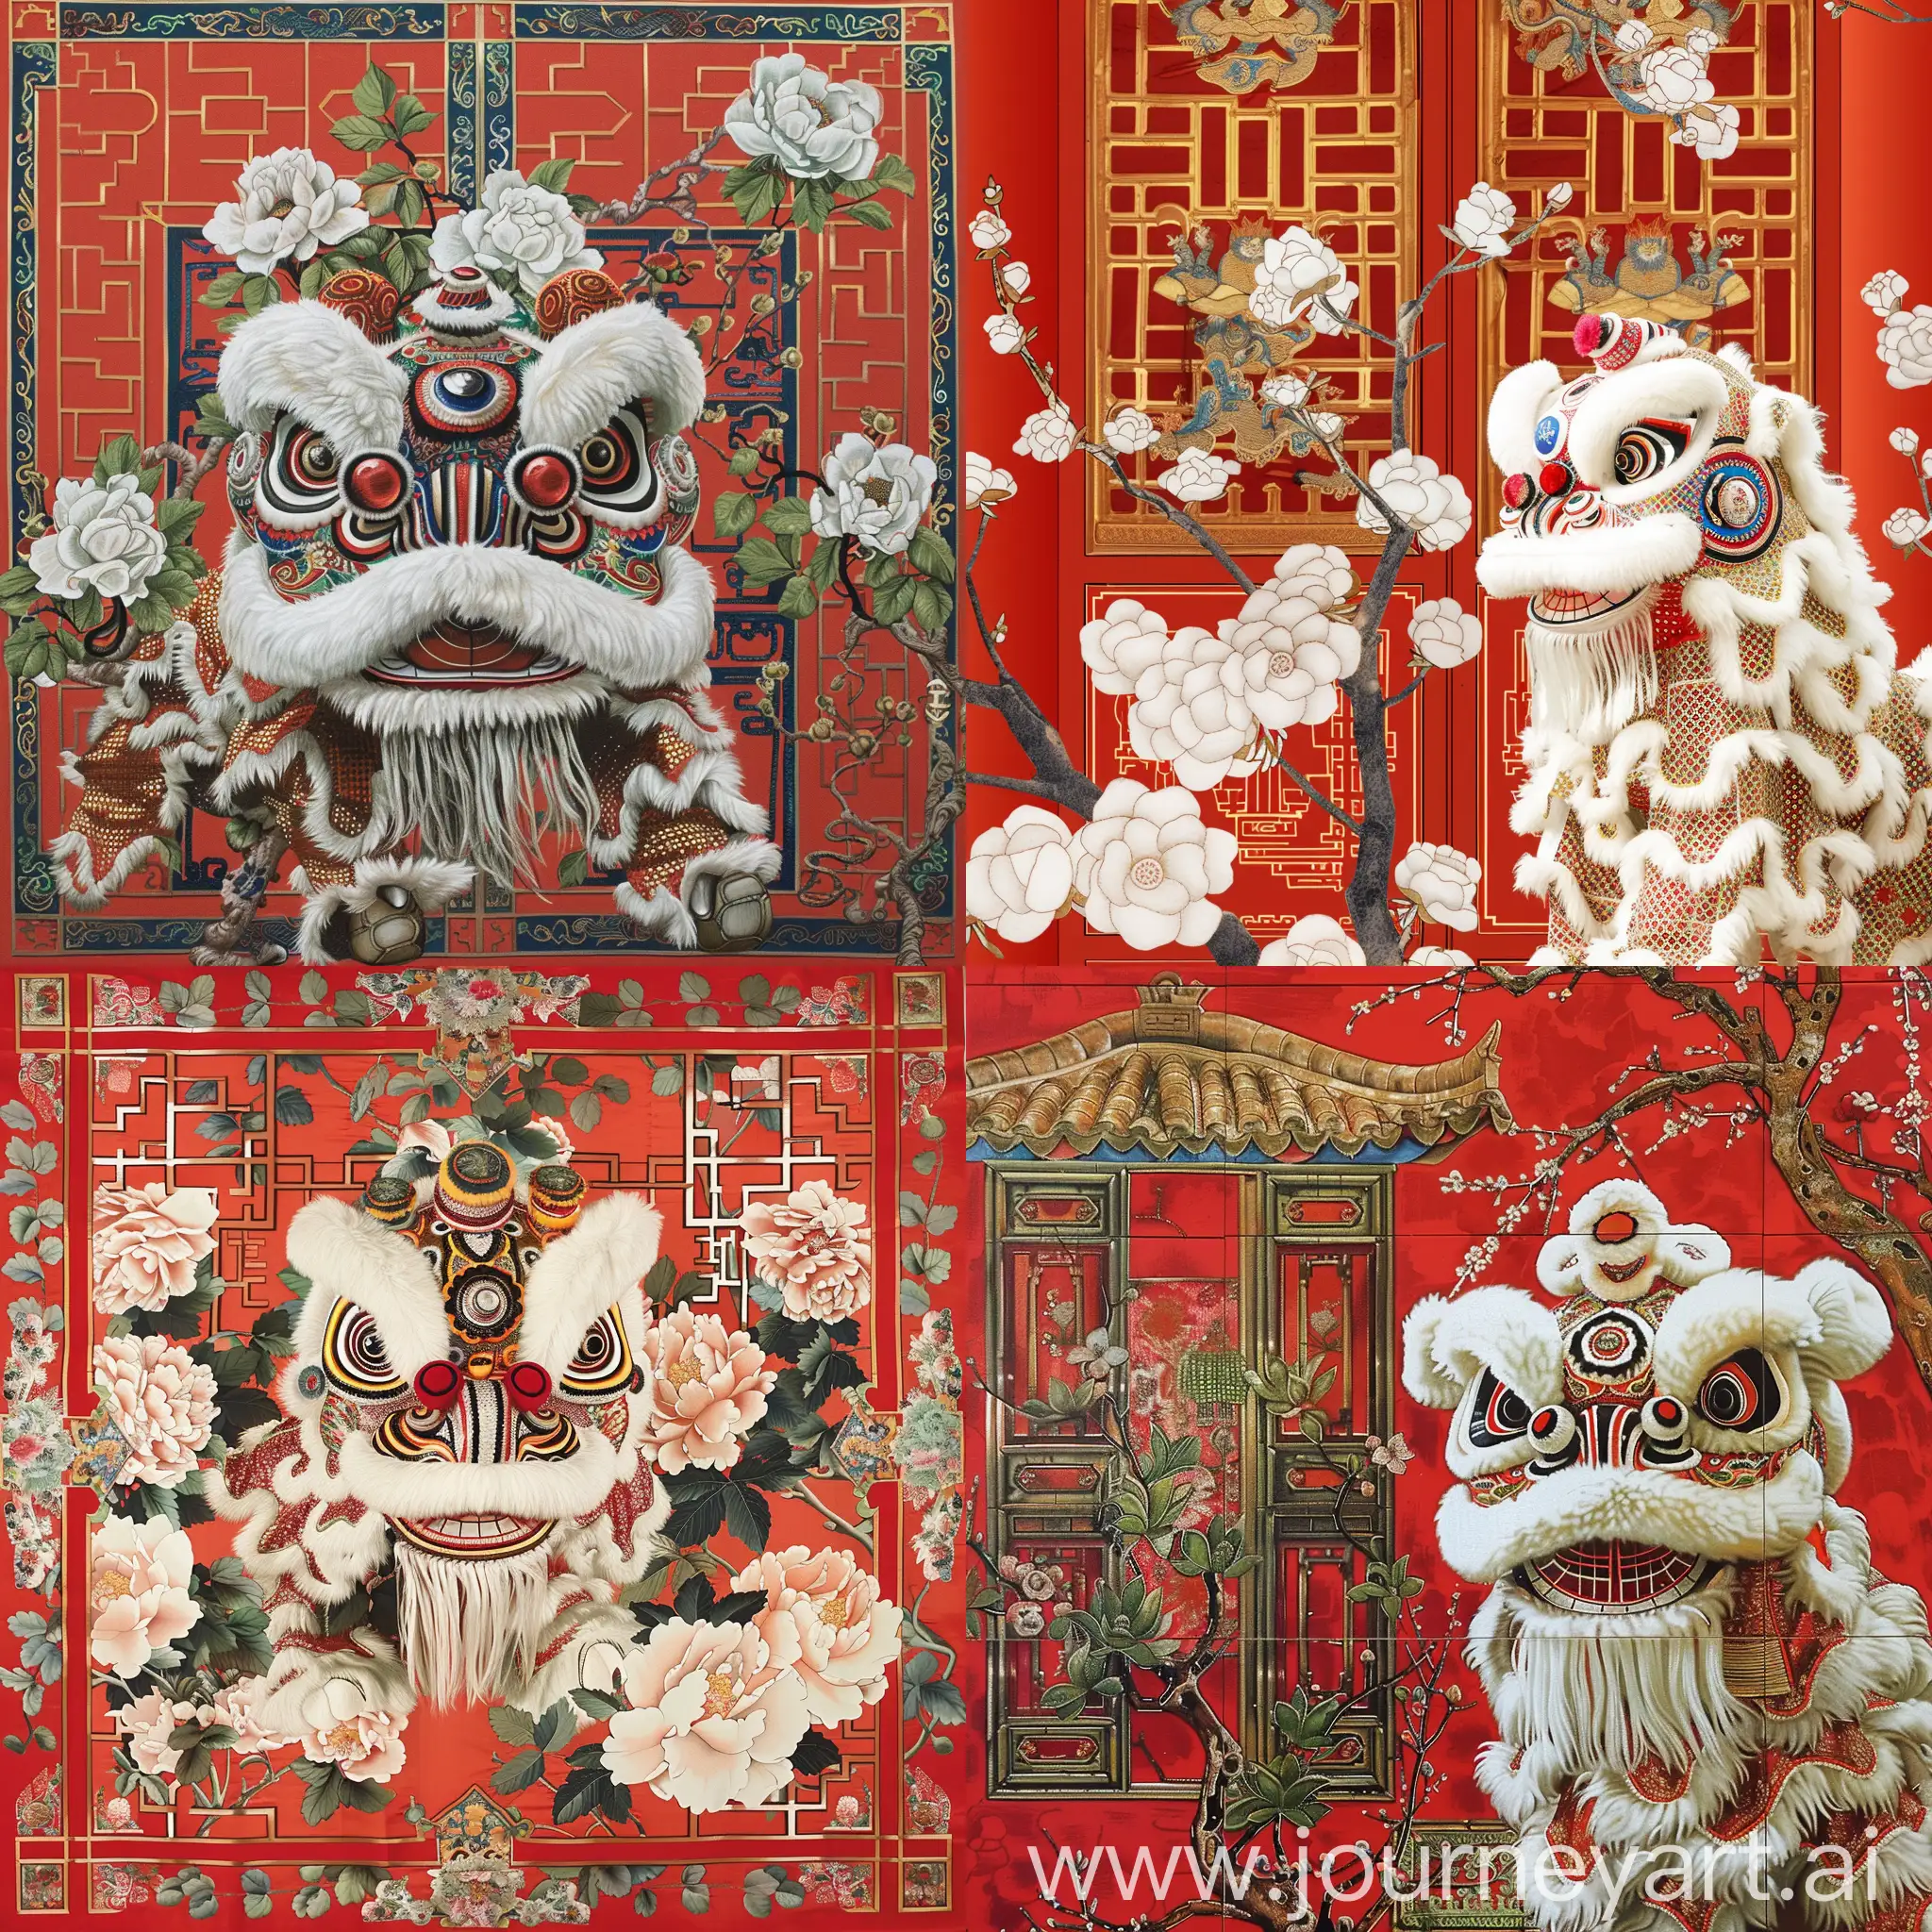 Cotton-Flowers-and-Lion-Dance-Traditional-Guang-Embroidery-with-Manchurian-Windows-in-Vibrant-Red